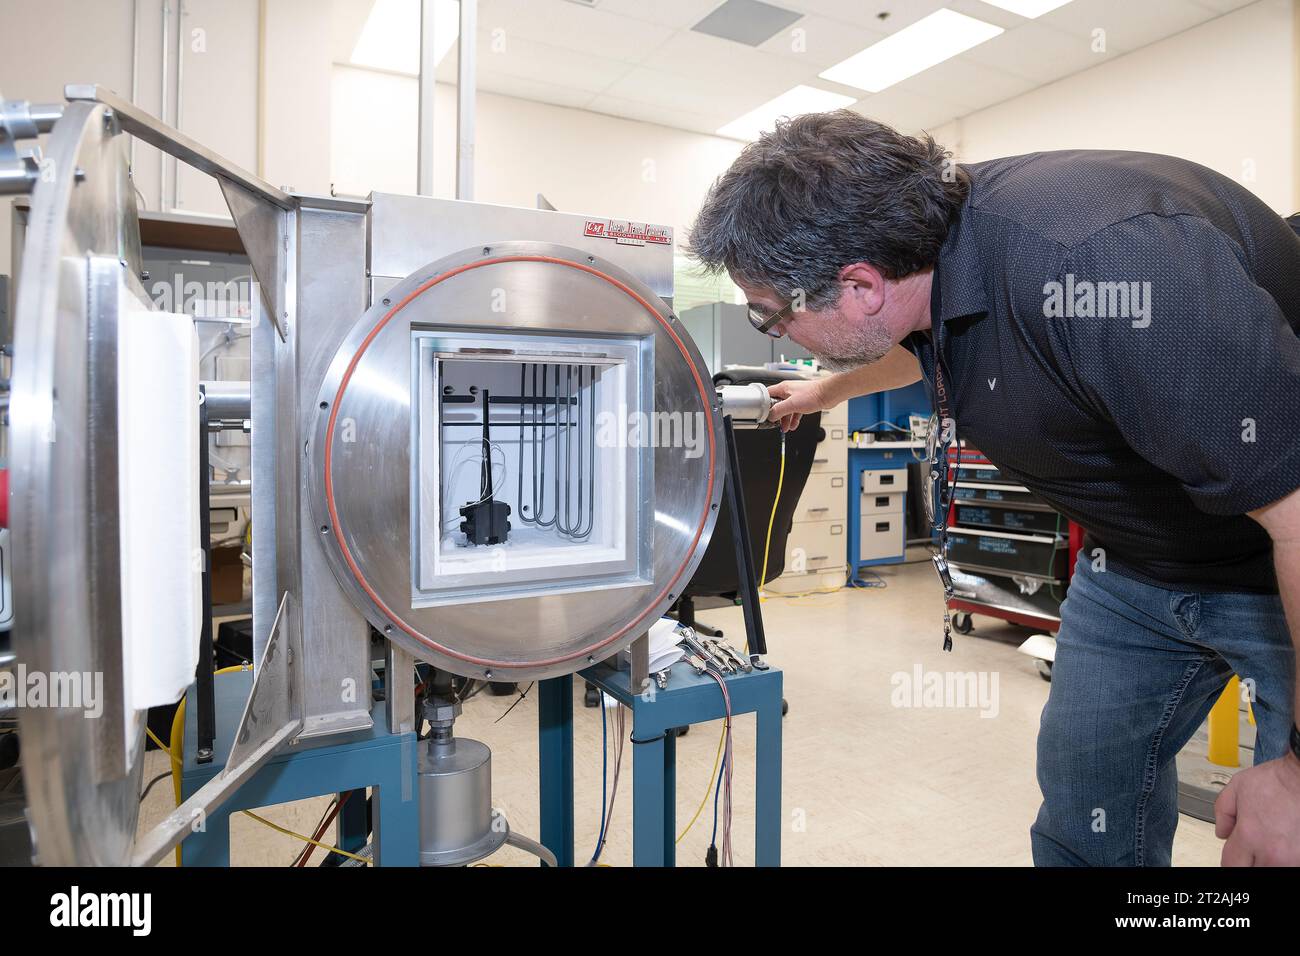 . Anthony piazza, a researcher at NASA’s Armstrong Flight Research center in Edwards, California, works with high-temperature strain sensors. This test article is a bending load bar, which enables high-temperature optical strain sensor research up to 1,800 degrees Fahrenheit. Stock Photo